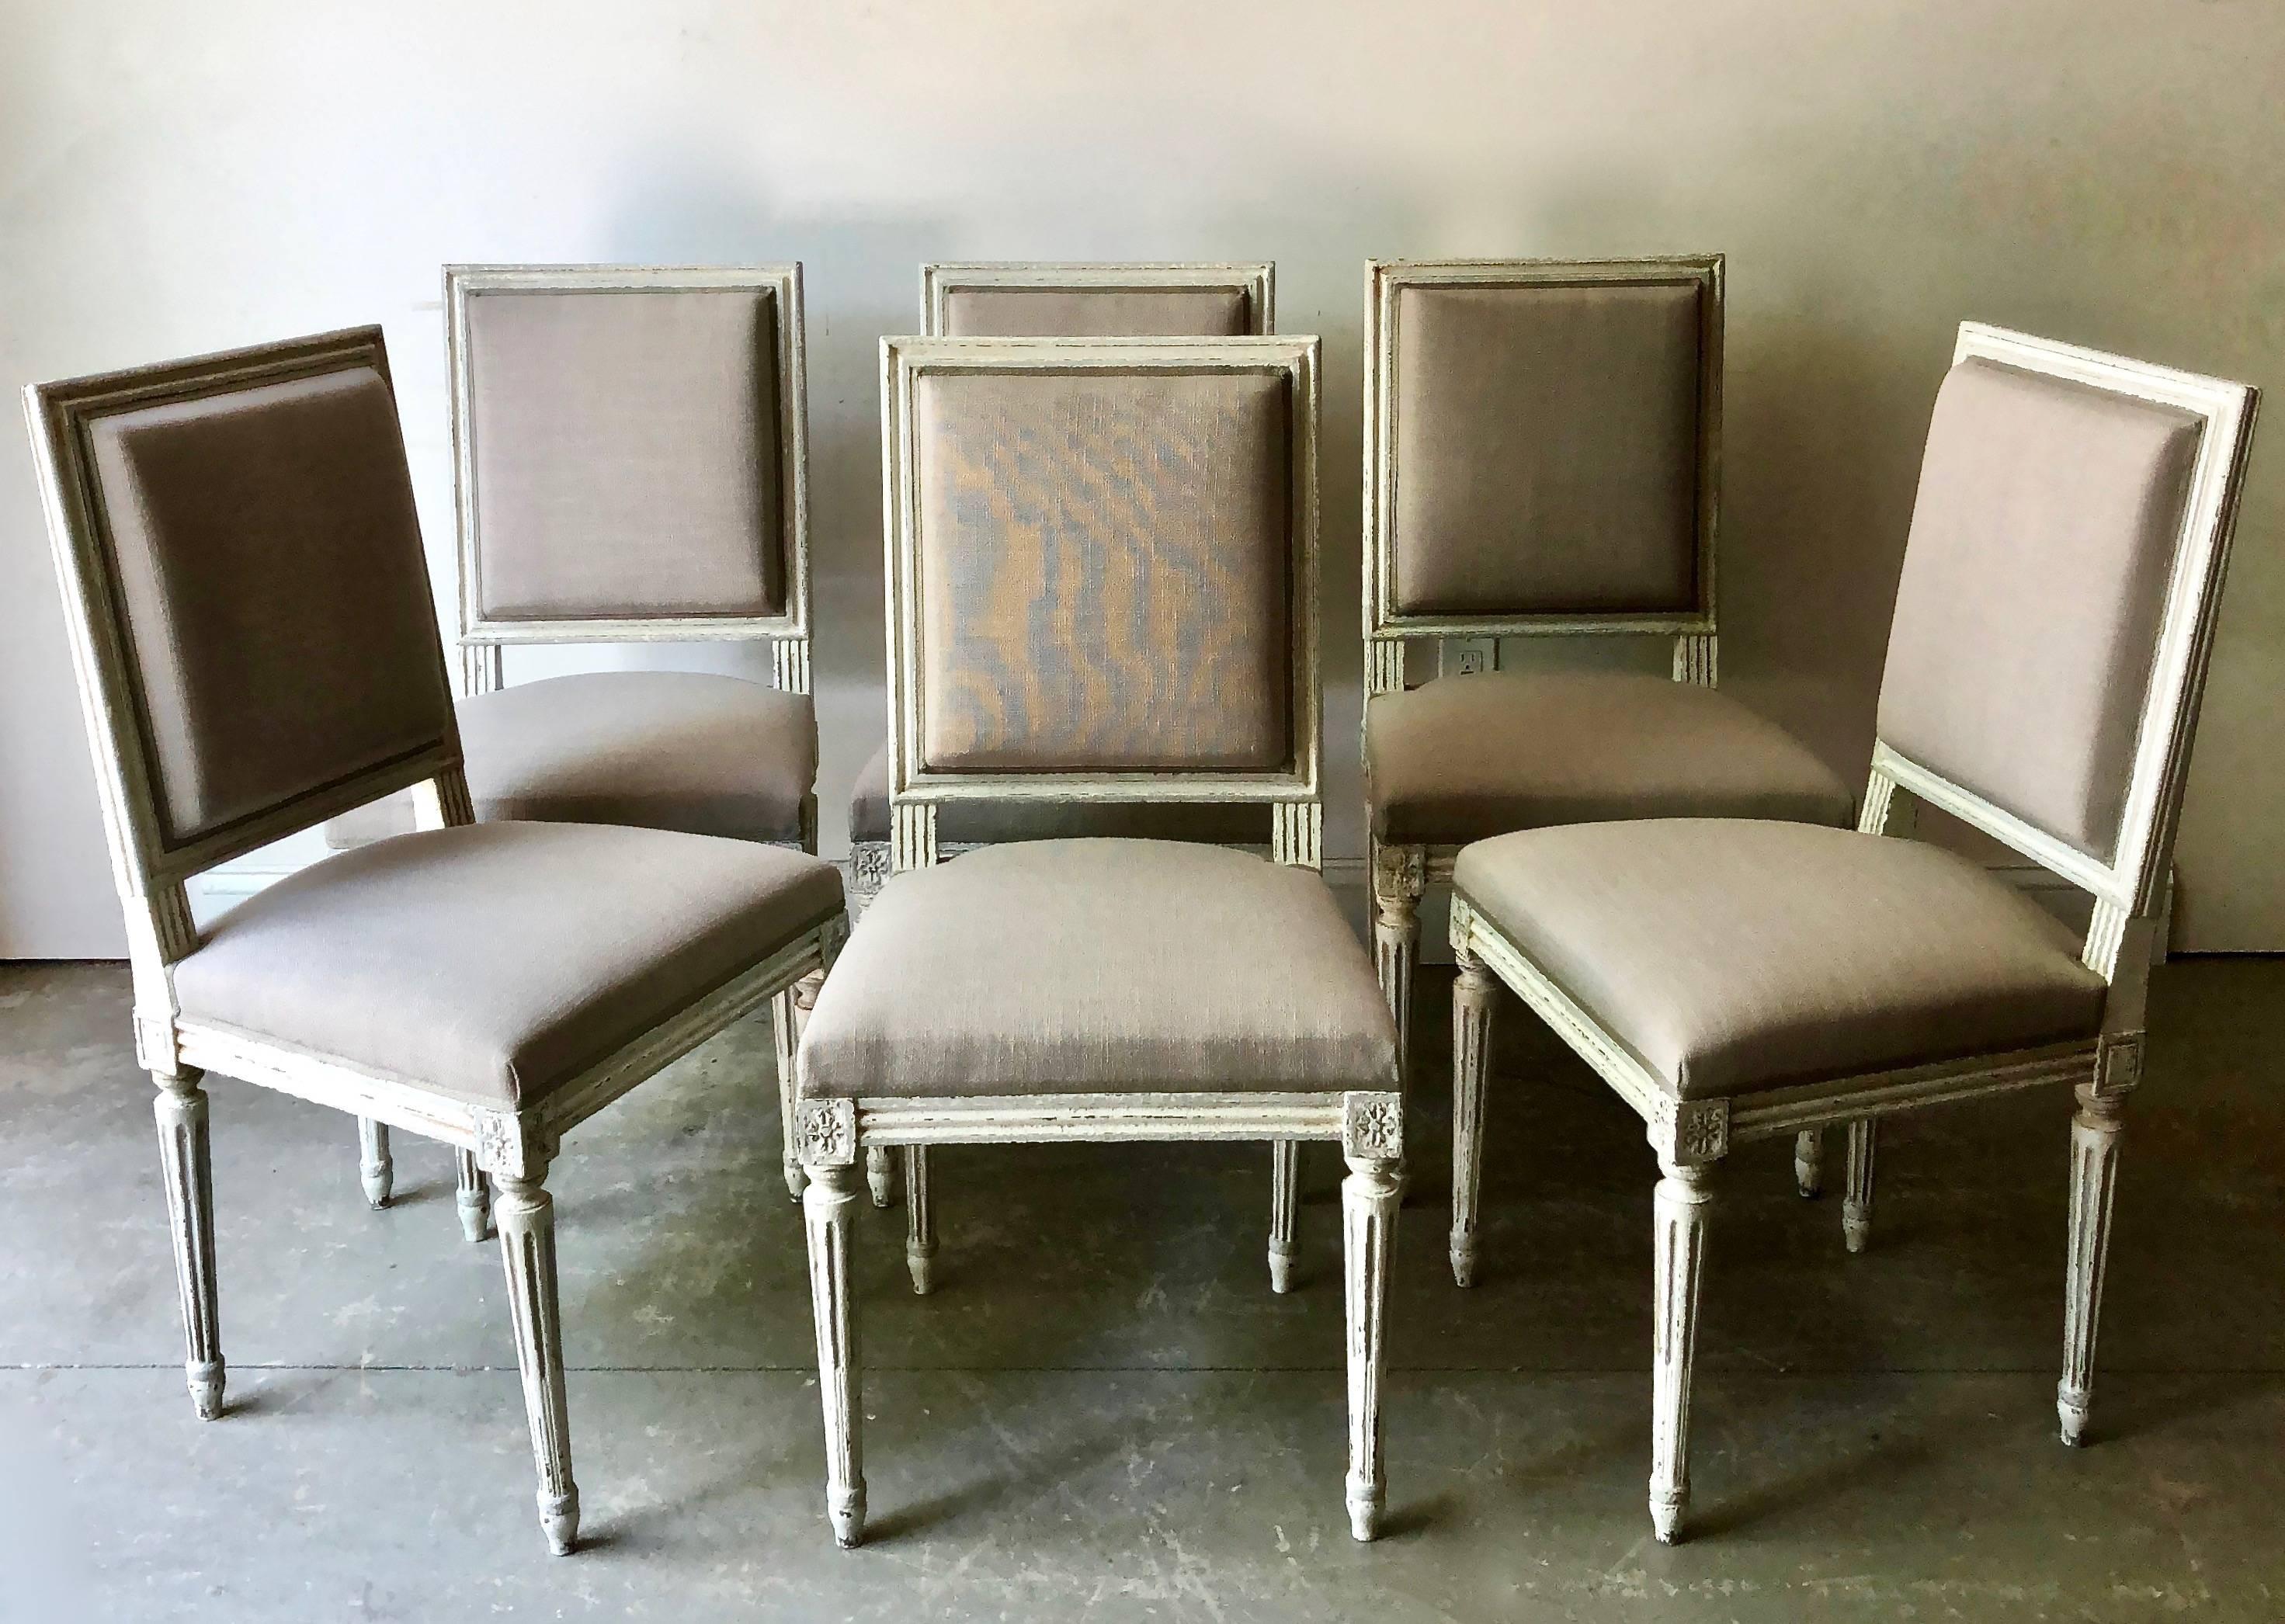 Set of six French Louis XVI style chairs with wood frames in lovely cream-grey-blue painted finish in richly carved frame, fluted leg and cubic blocks decorated with florets. Upholstered in linen and finished with the Classic decorative cimp,